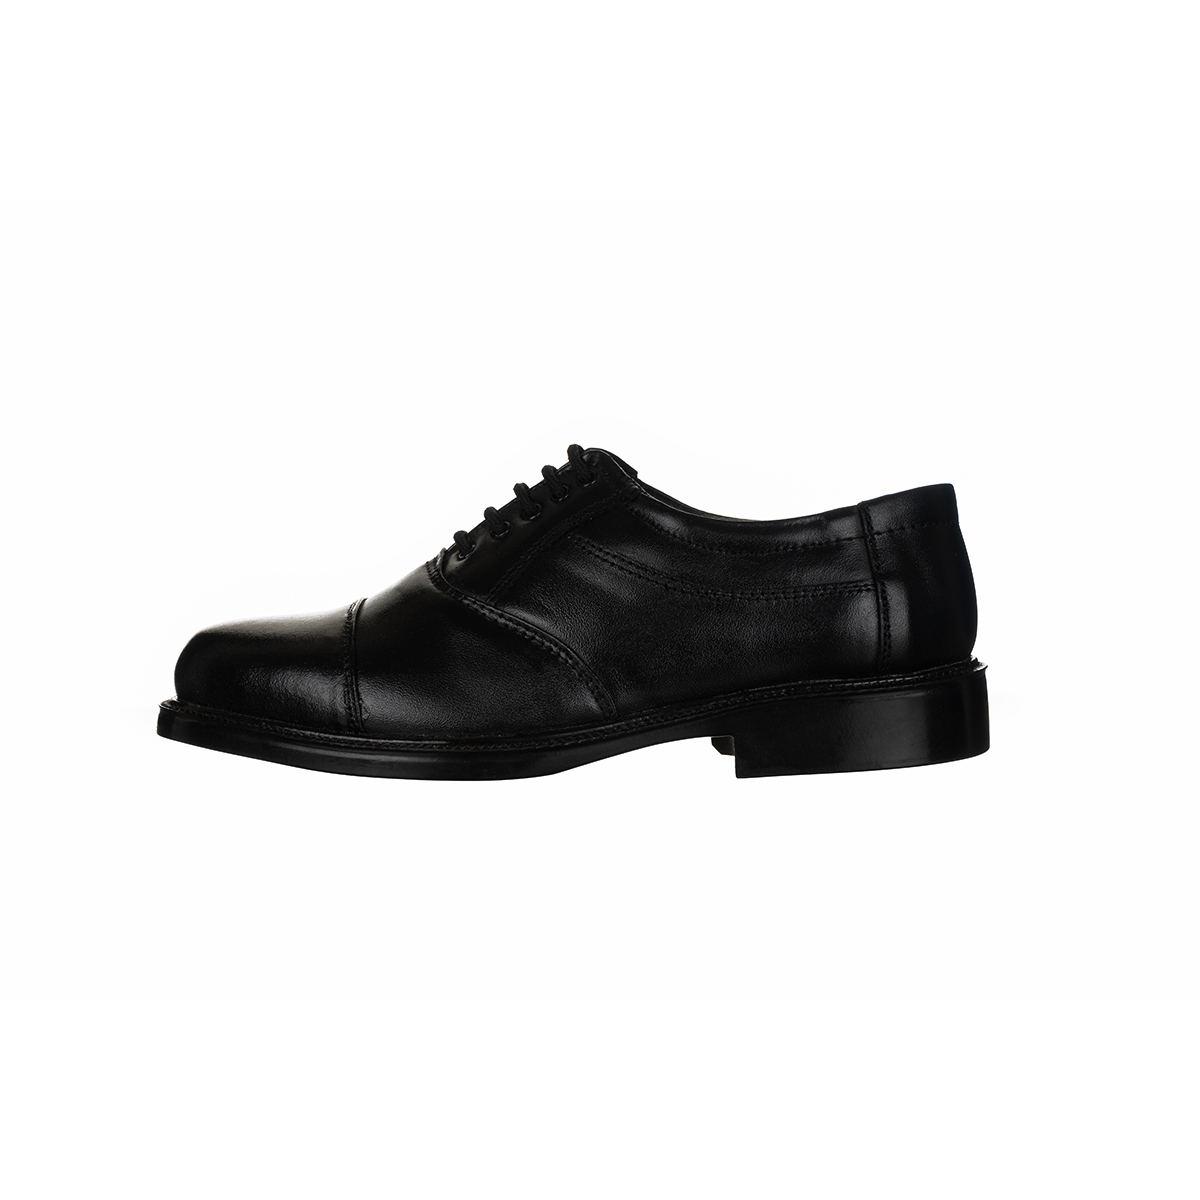 Mens Leather Oxford Shoes Manufacturers, Suppliers in Pune